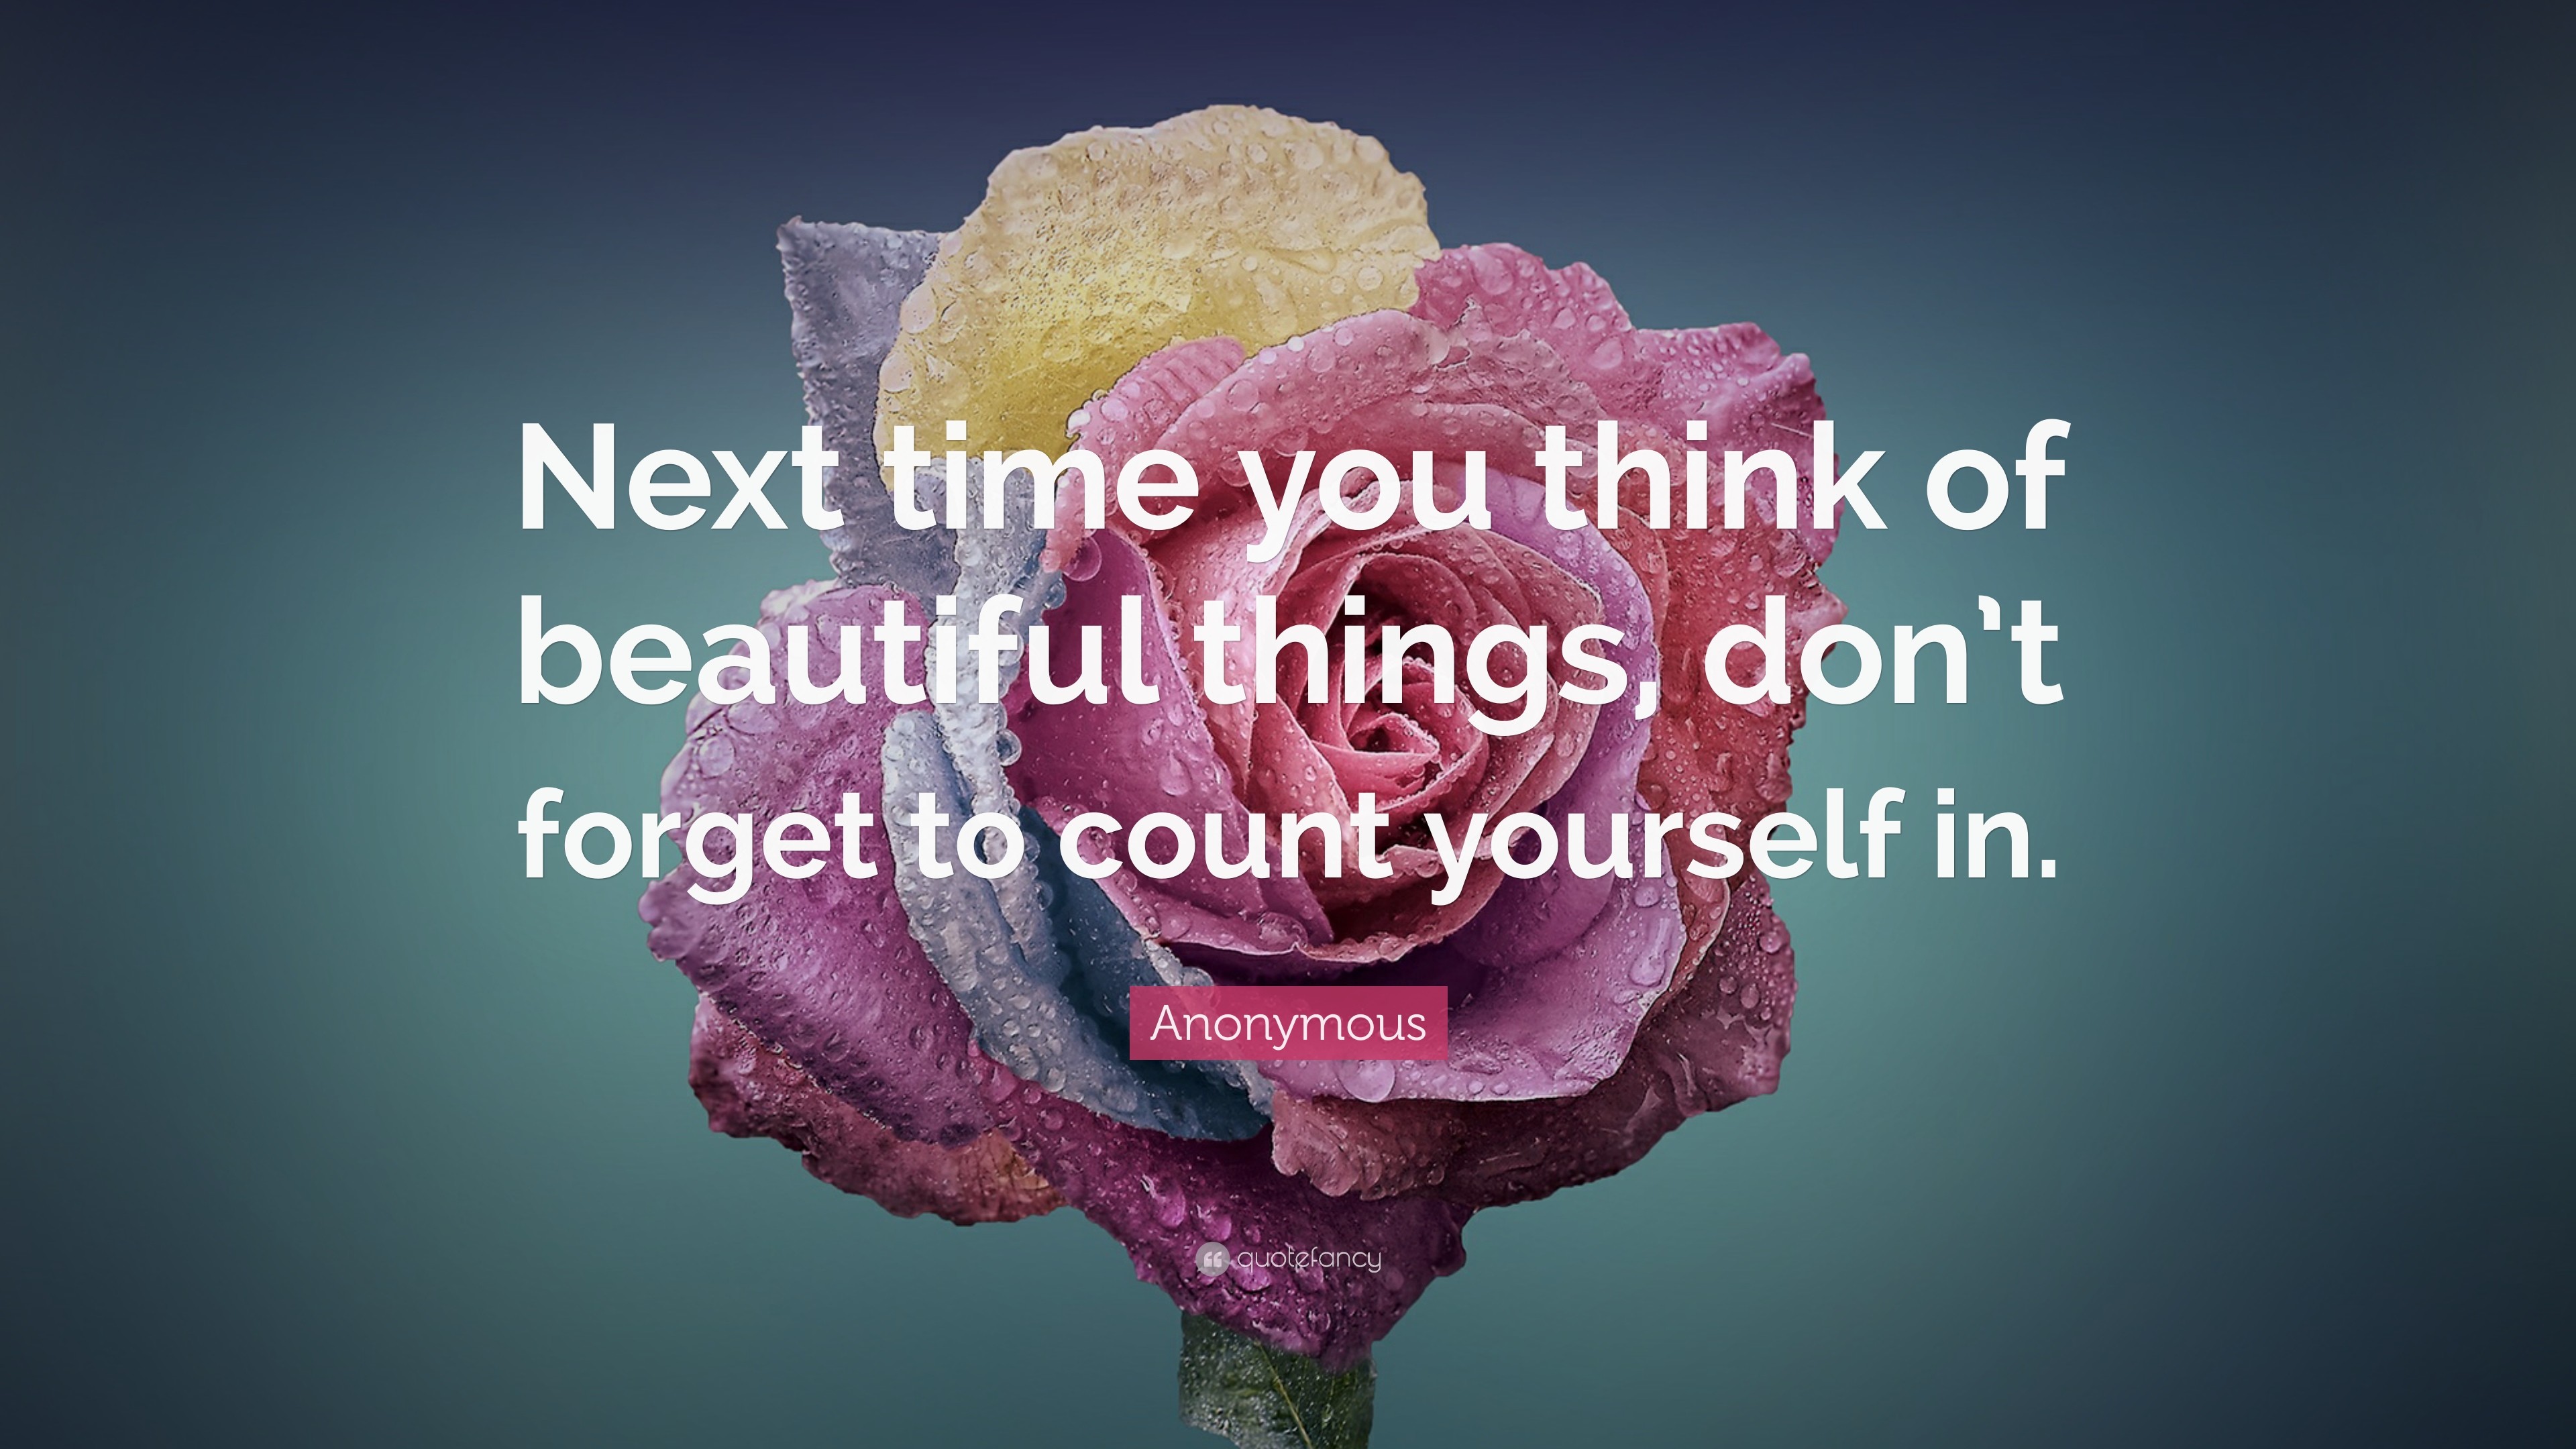 3840x2160 Beauty Quotes: “Next time you think of beautiful things, don't forget